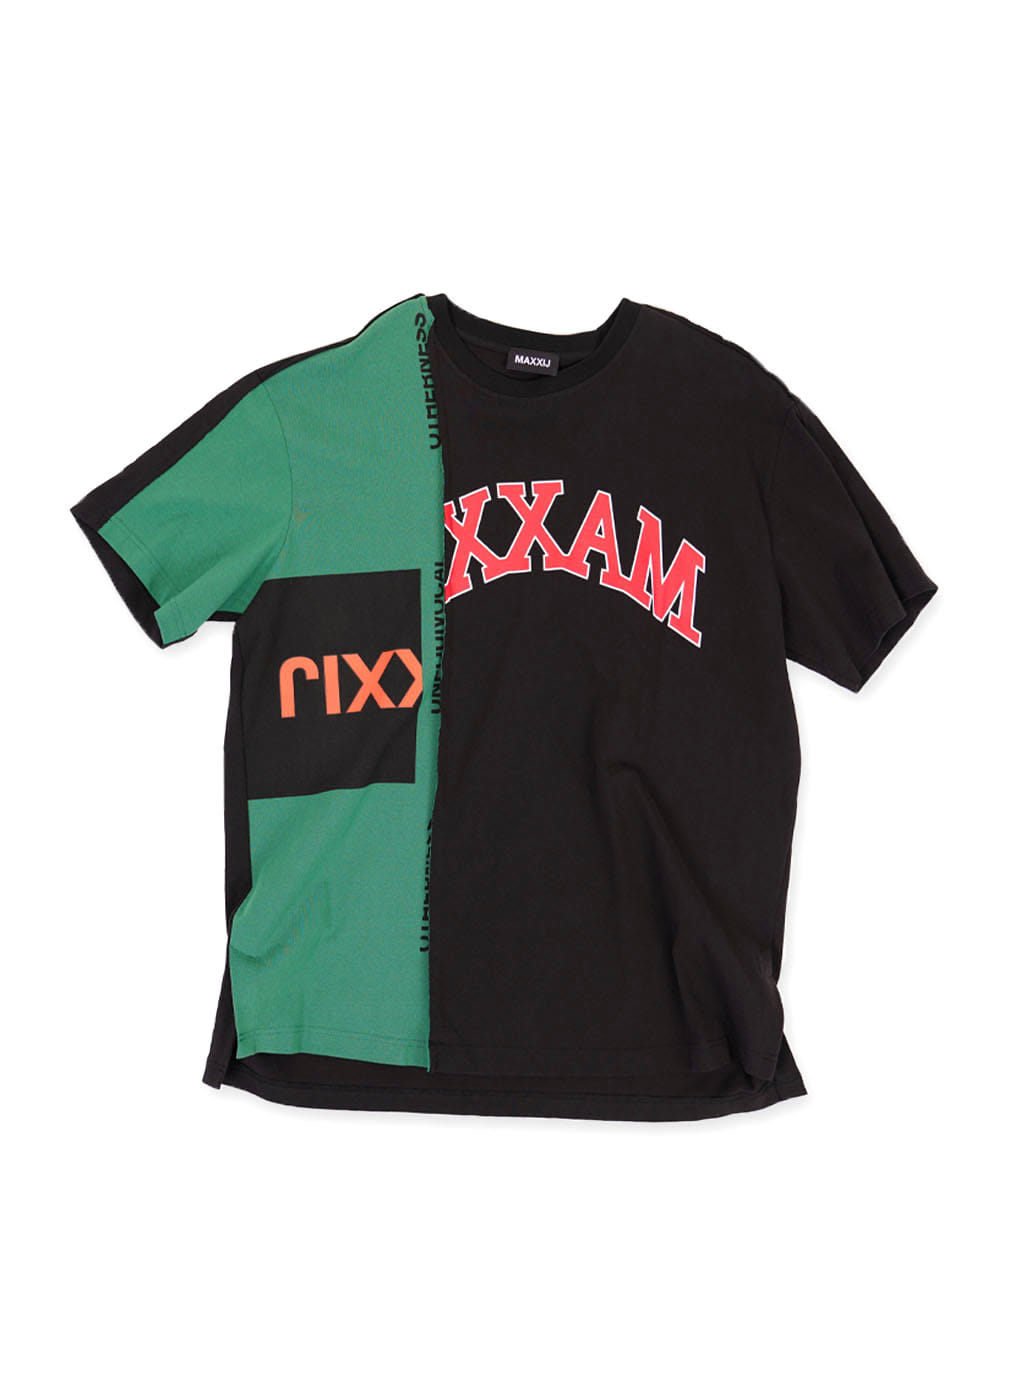 Green/Black Color Block Collage Printed T-shirt